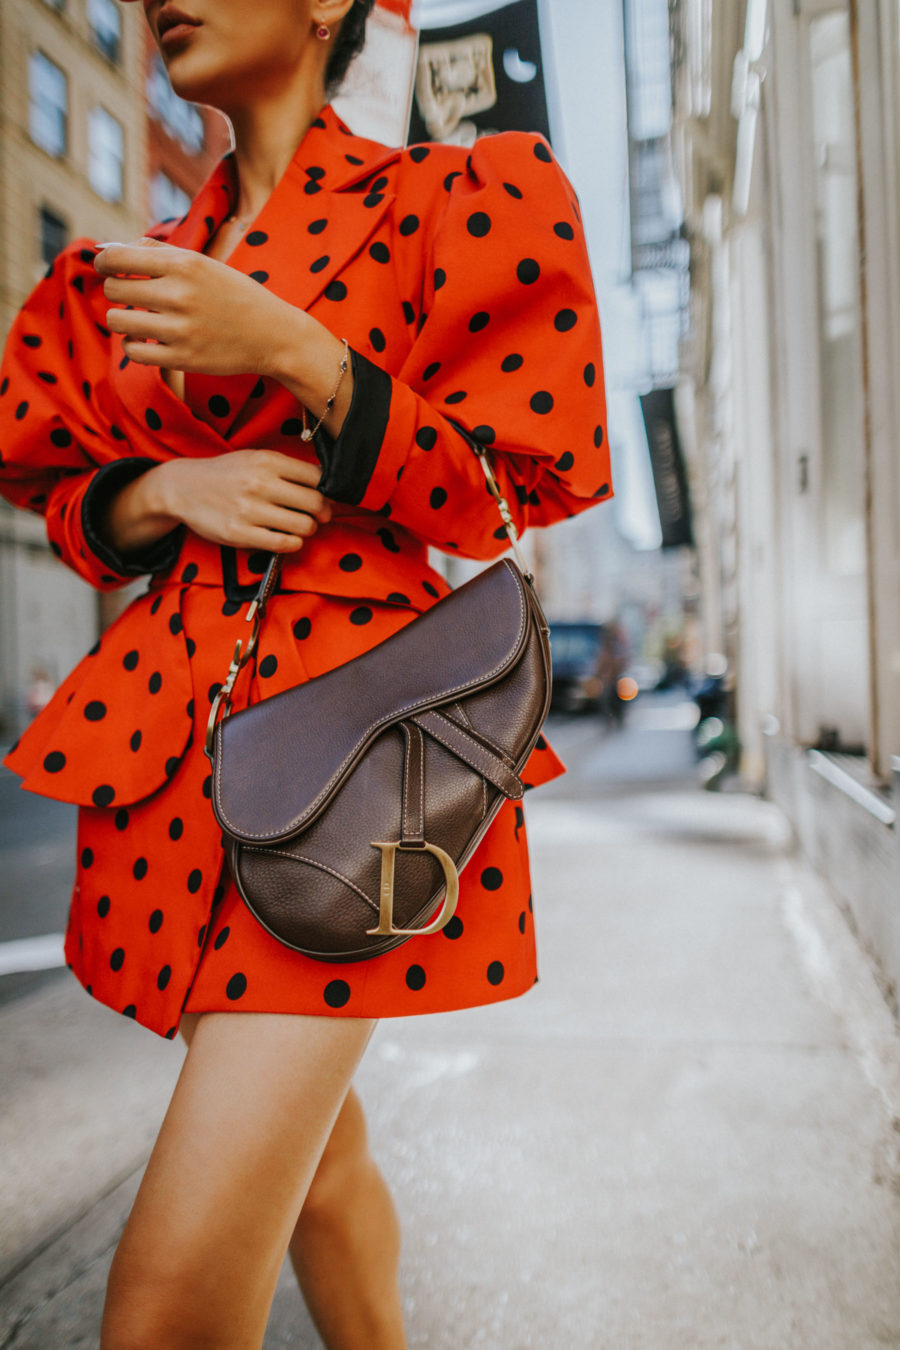 How to Manage a Full Day of Meetings in NYC - Uber's New Tools for Tricky Pickups, Red Polka Dot Dress, Dior Saddle Bag // Notjessfashion.com